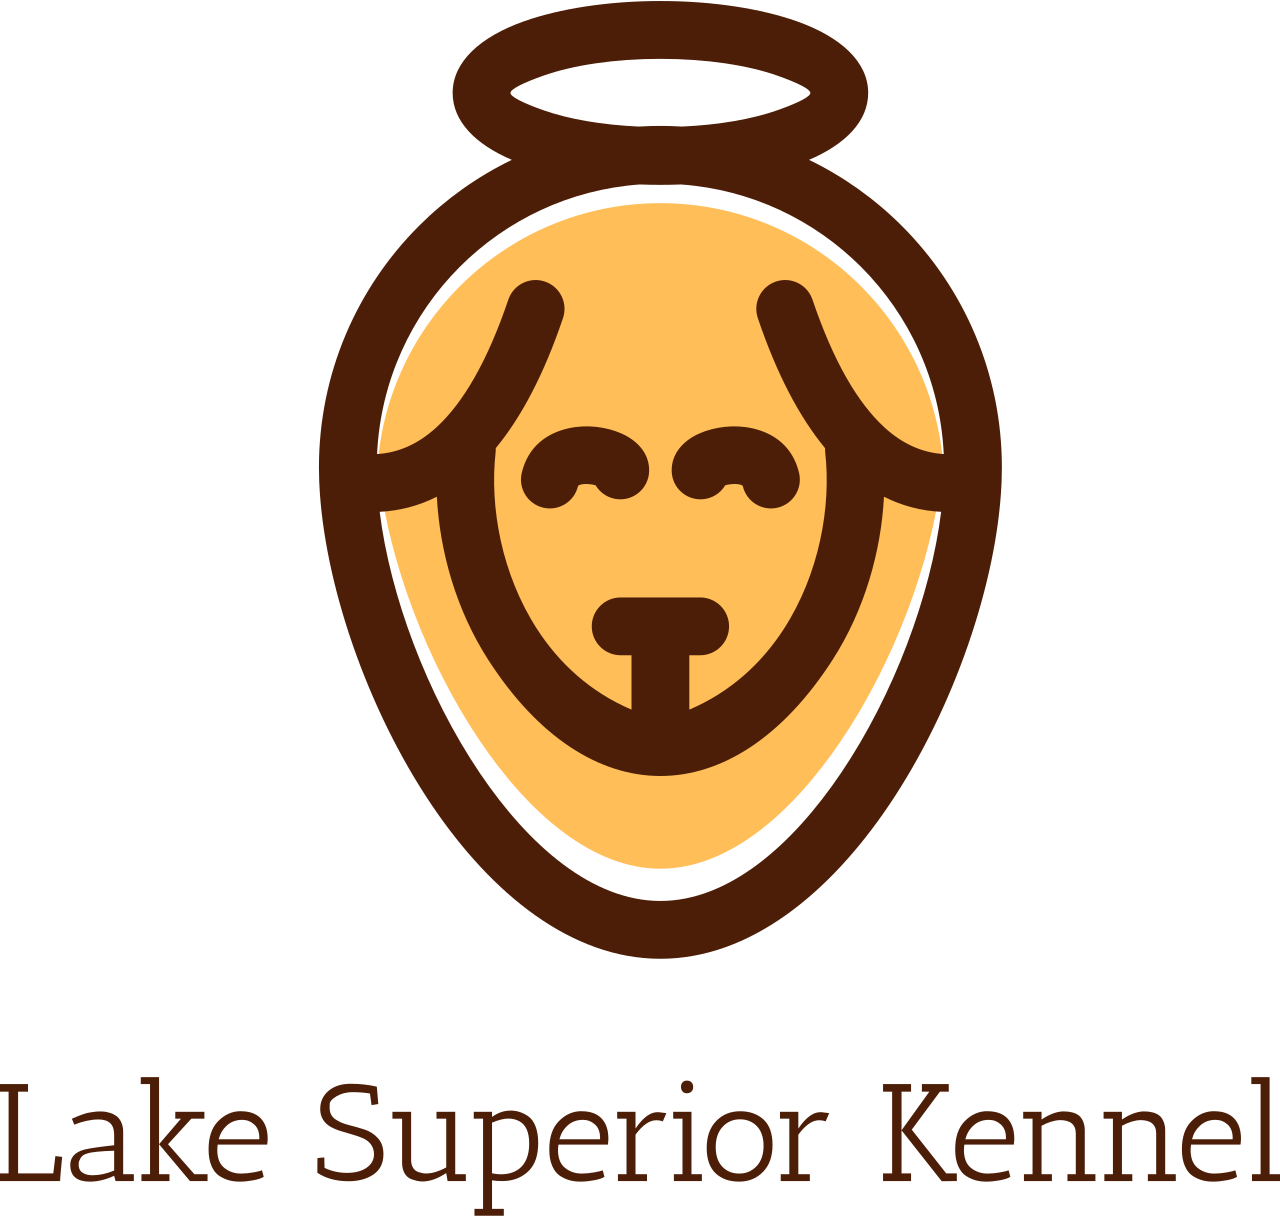 Lake Superior Kennel 's web page